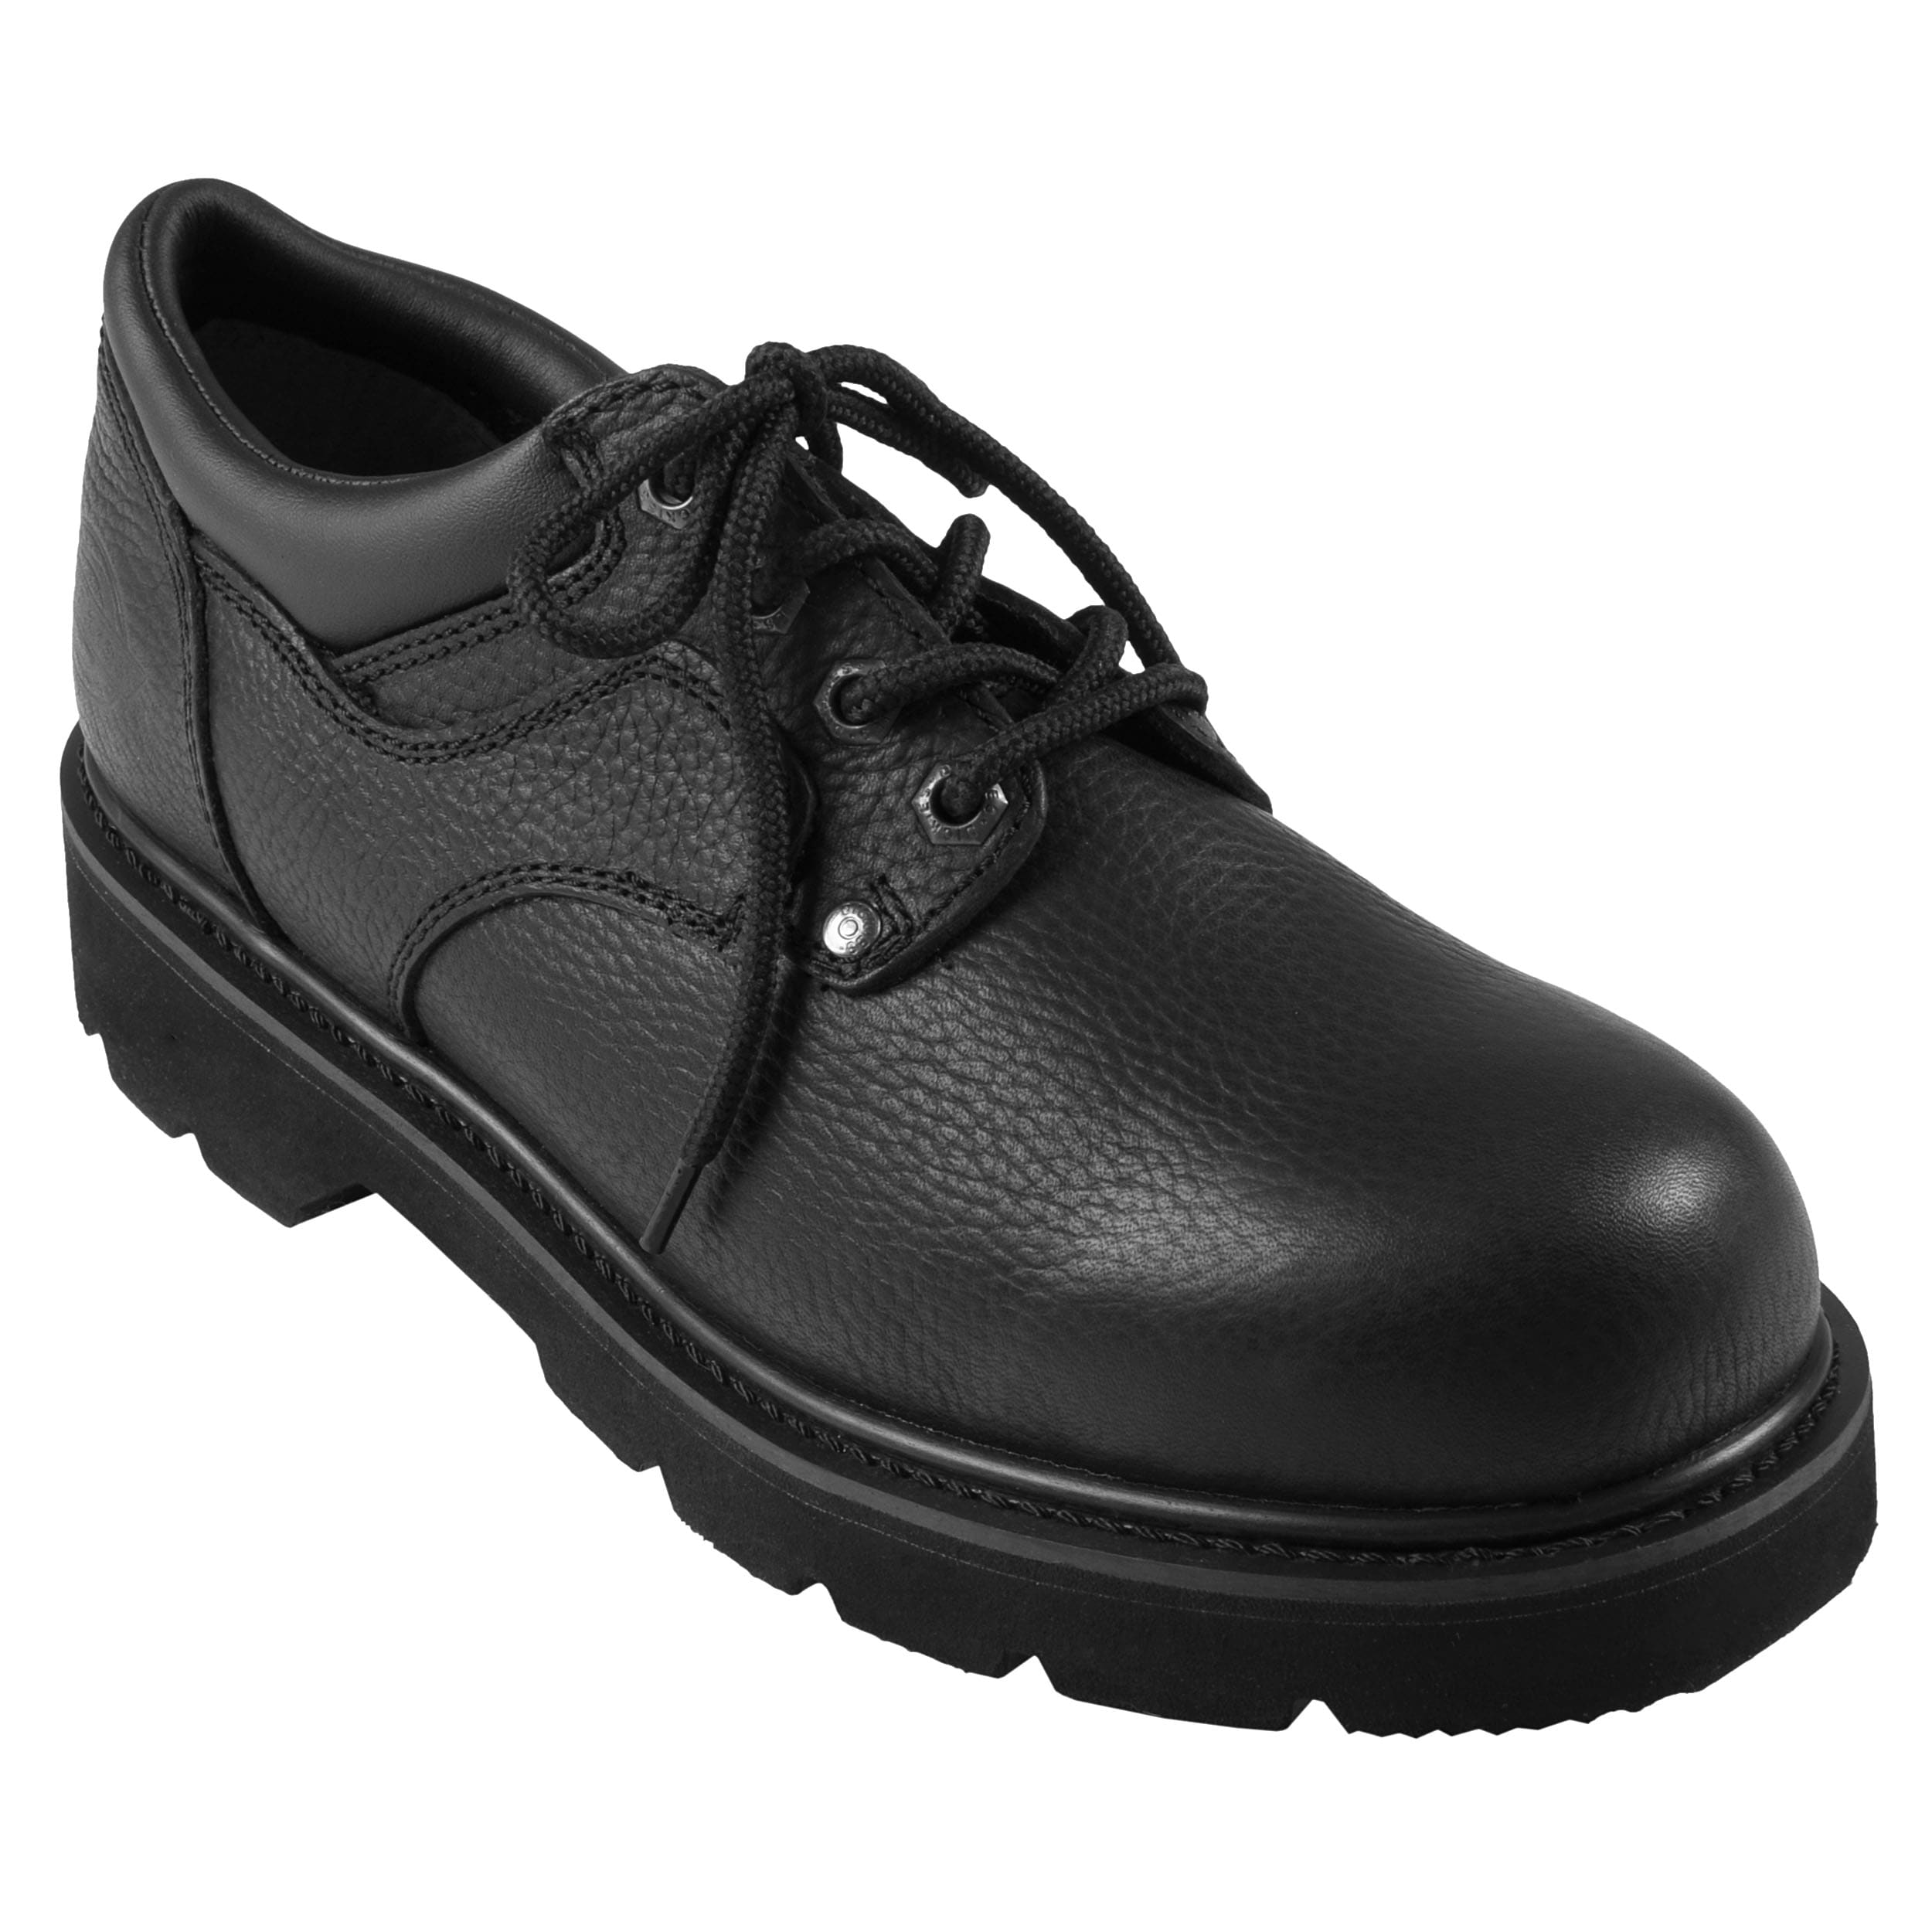 Dickies Men's Wide Oxford Lug Sole Genuine Leather Lace-up Shoe